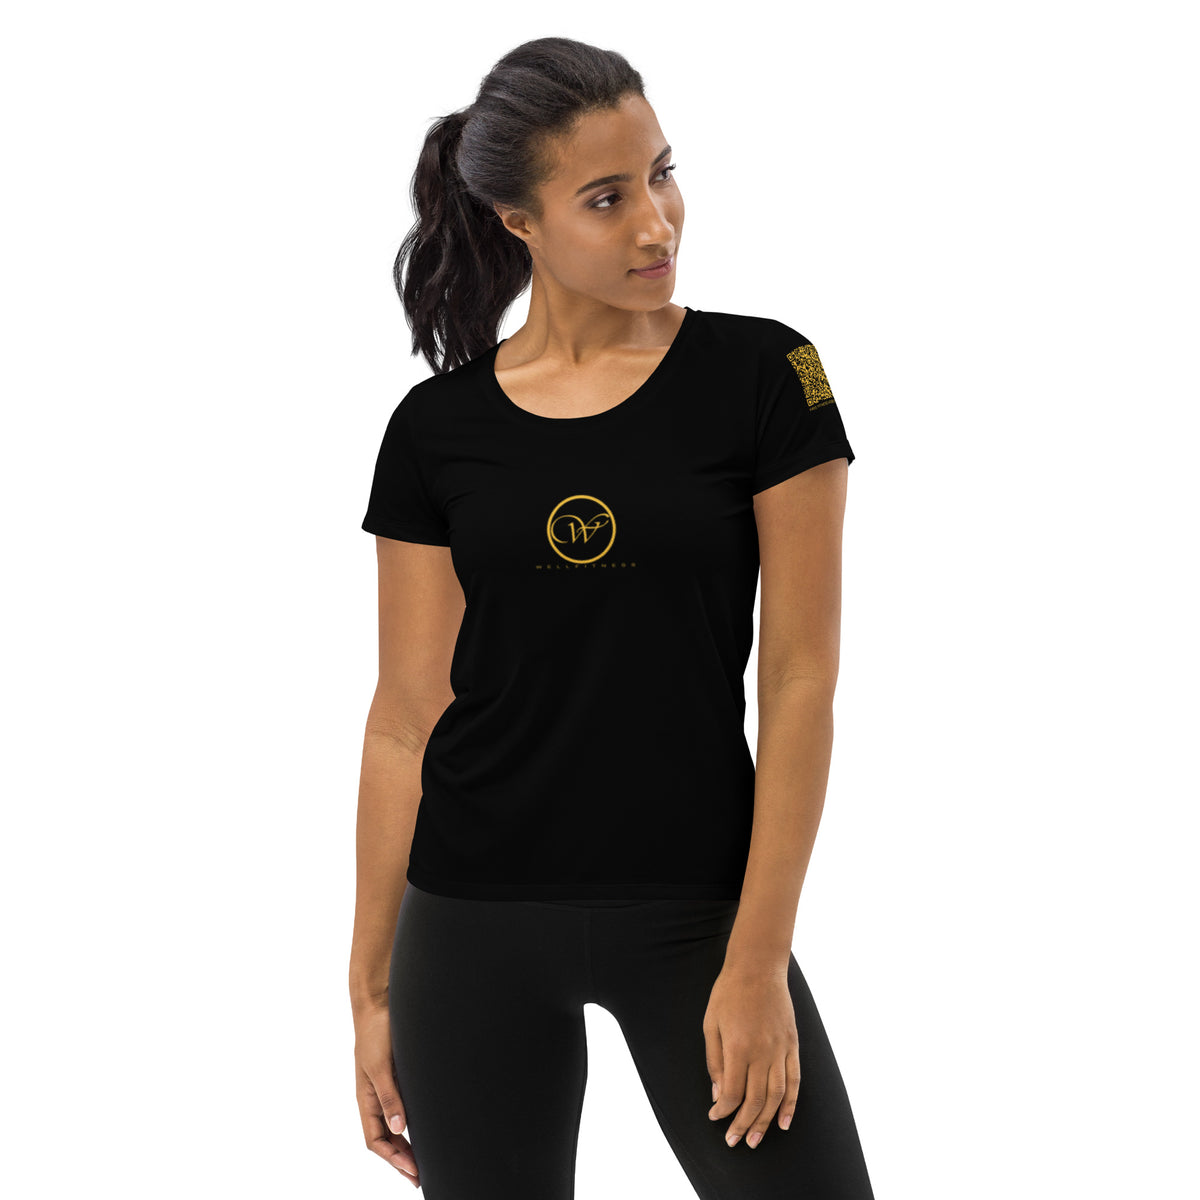 Woman Fitness Trainer All-Over Print Women's Athletic T-shirt